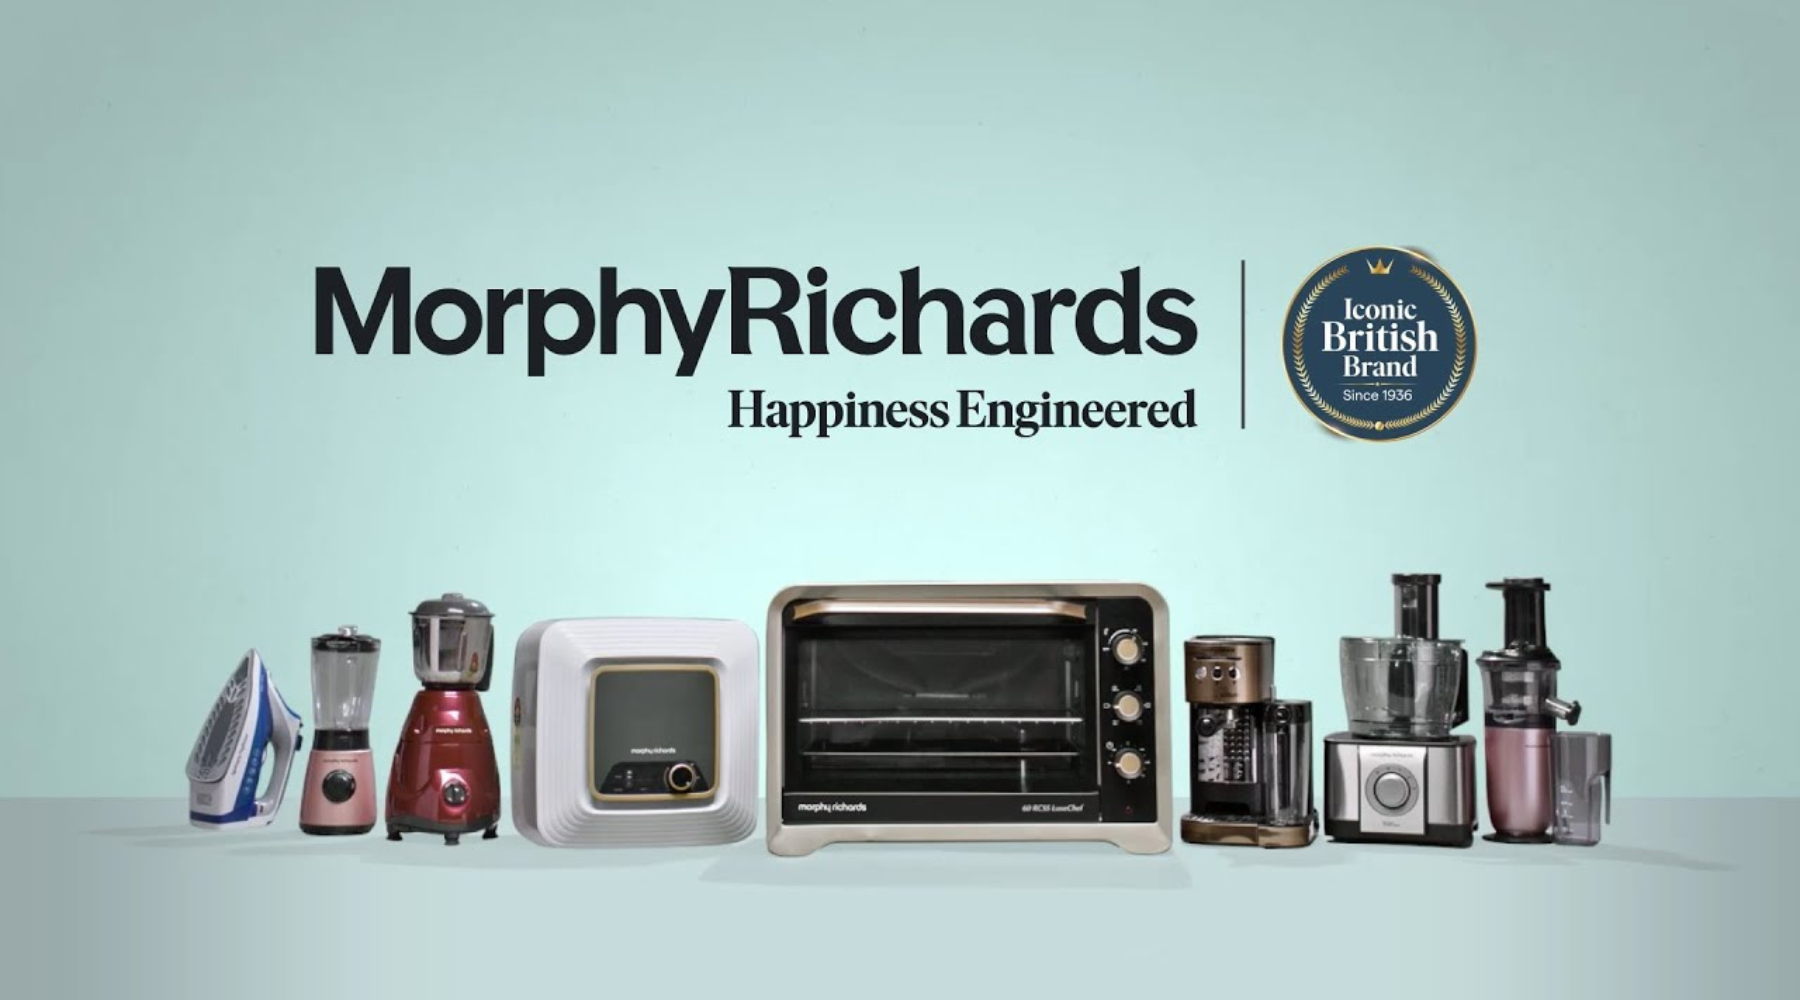 Morphy Richards product collection